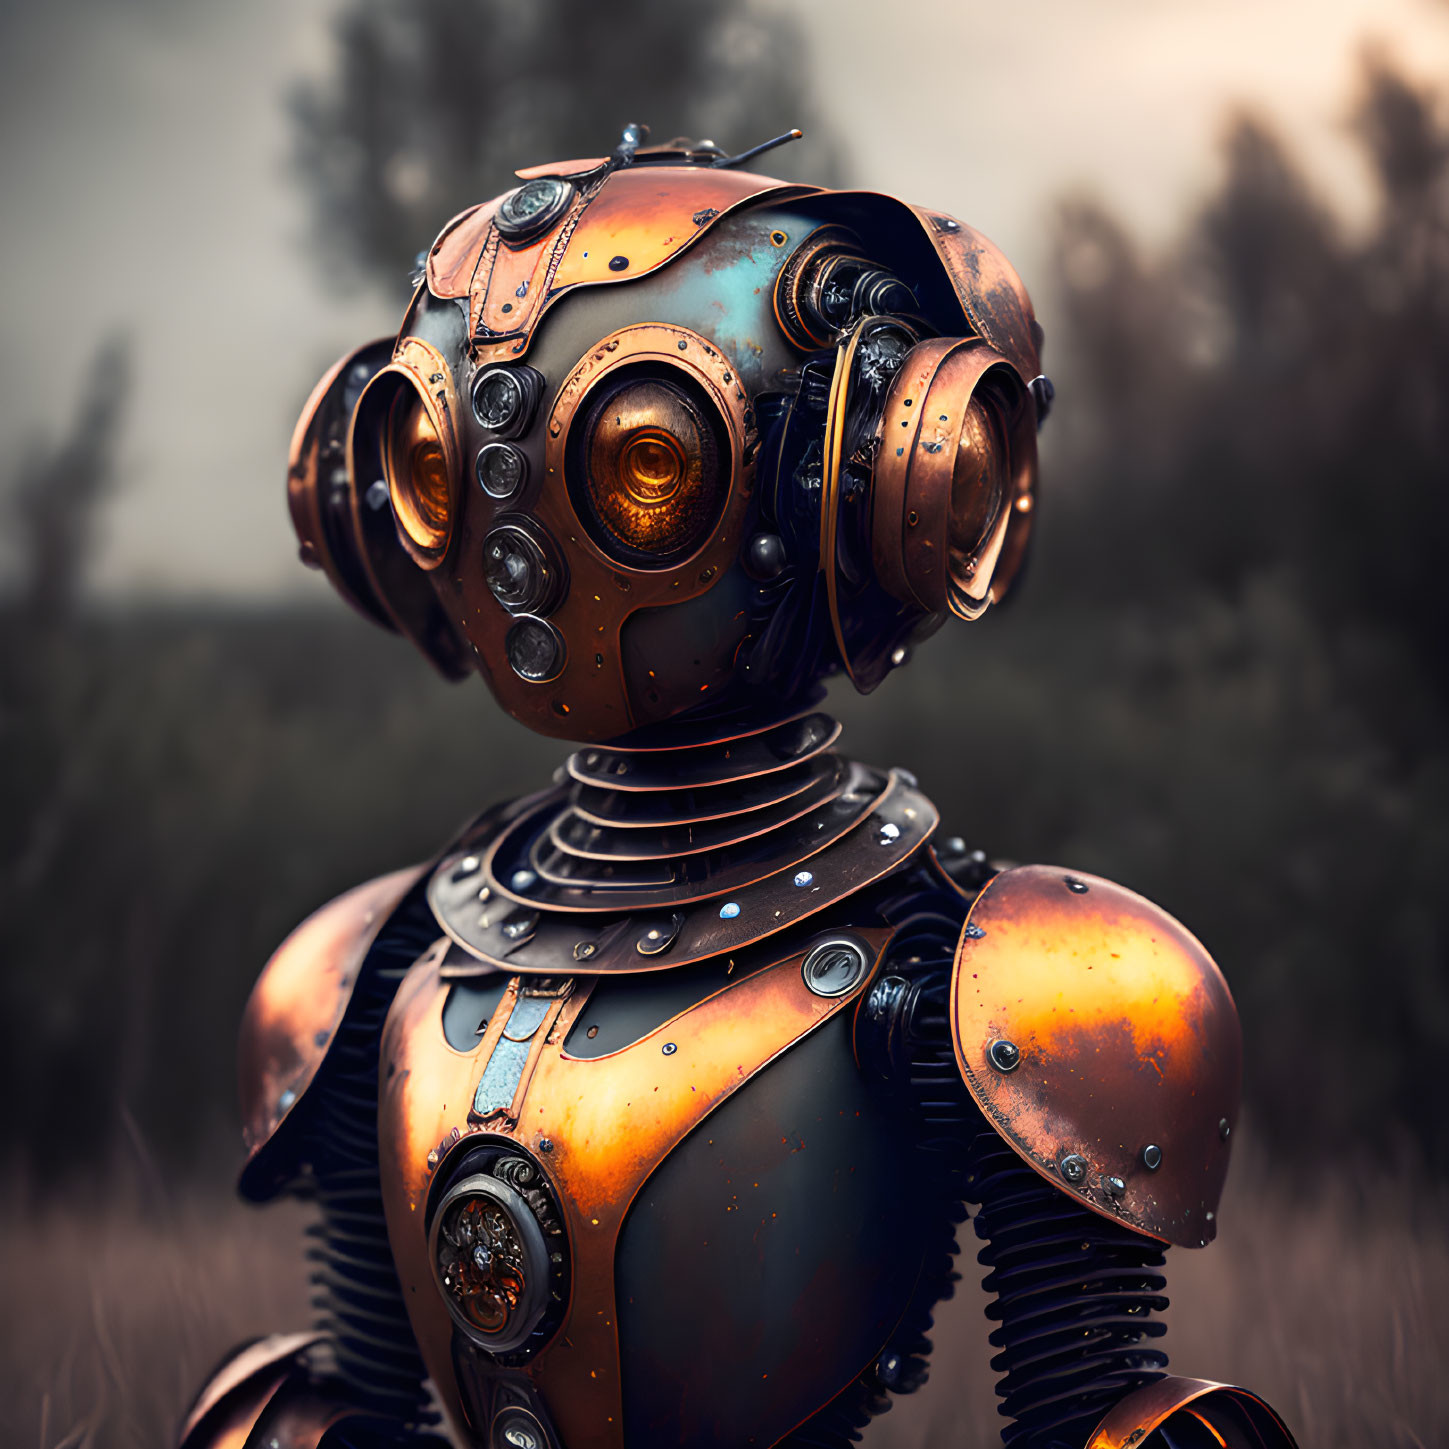 Steampunk-style robot with spherical head and multiple ocular lenses in misty outdoor setting